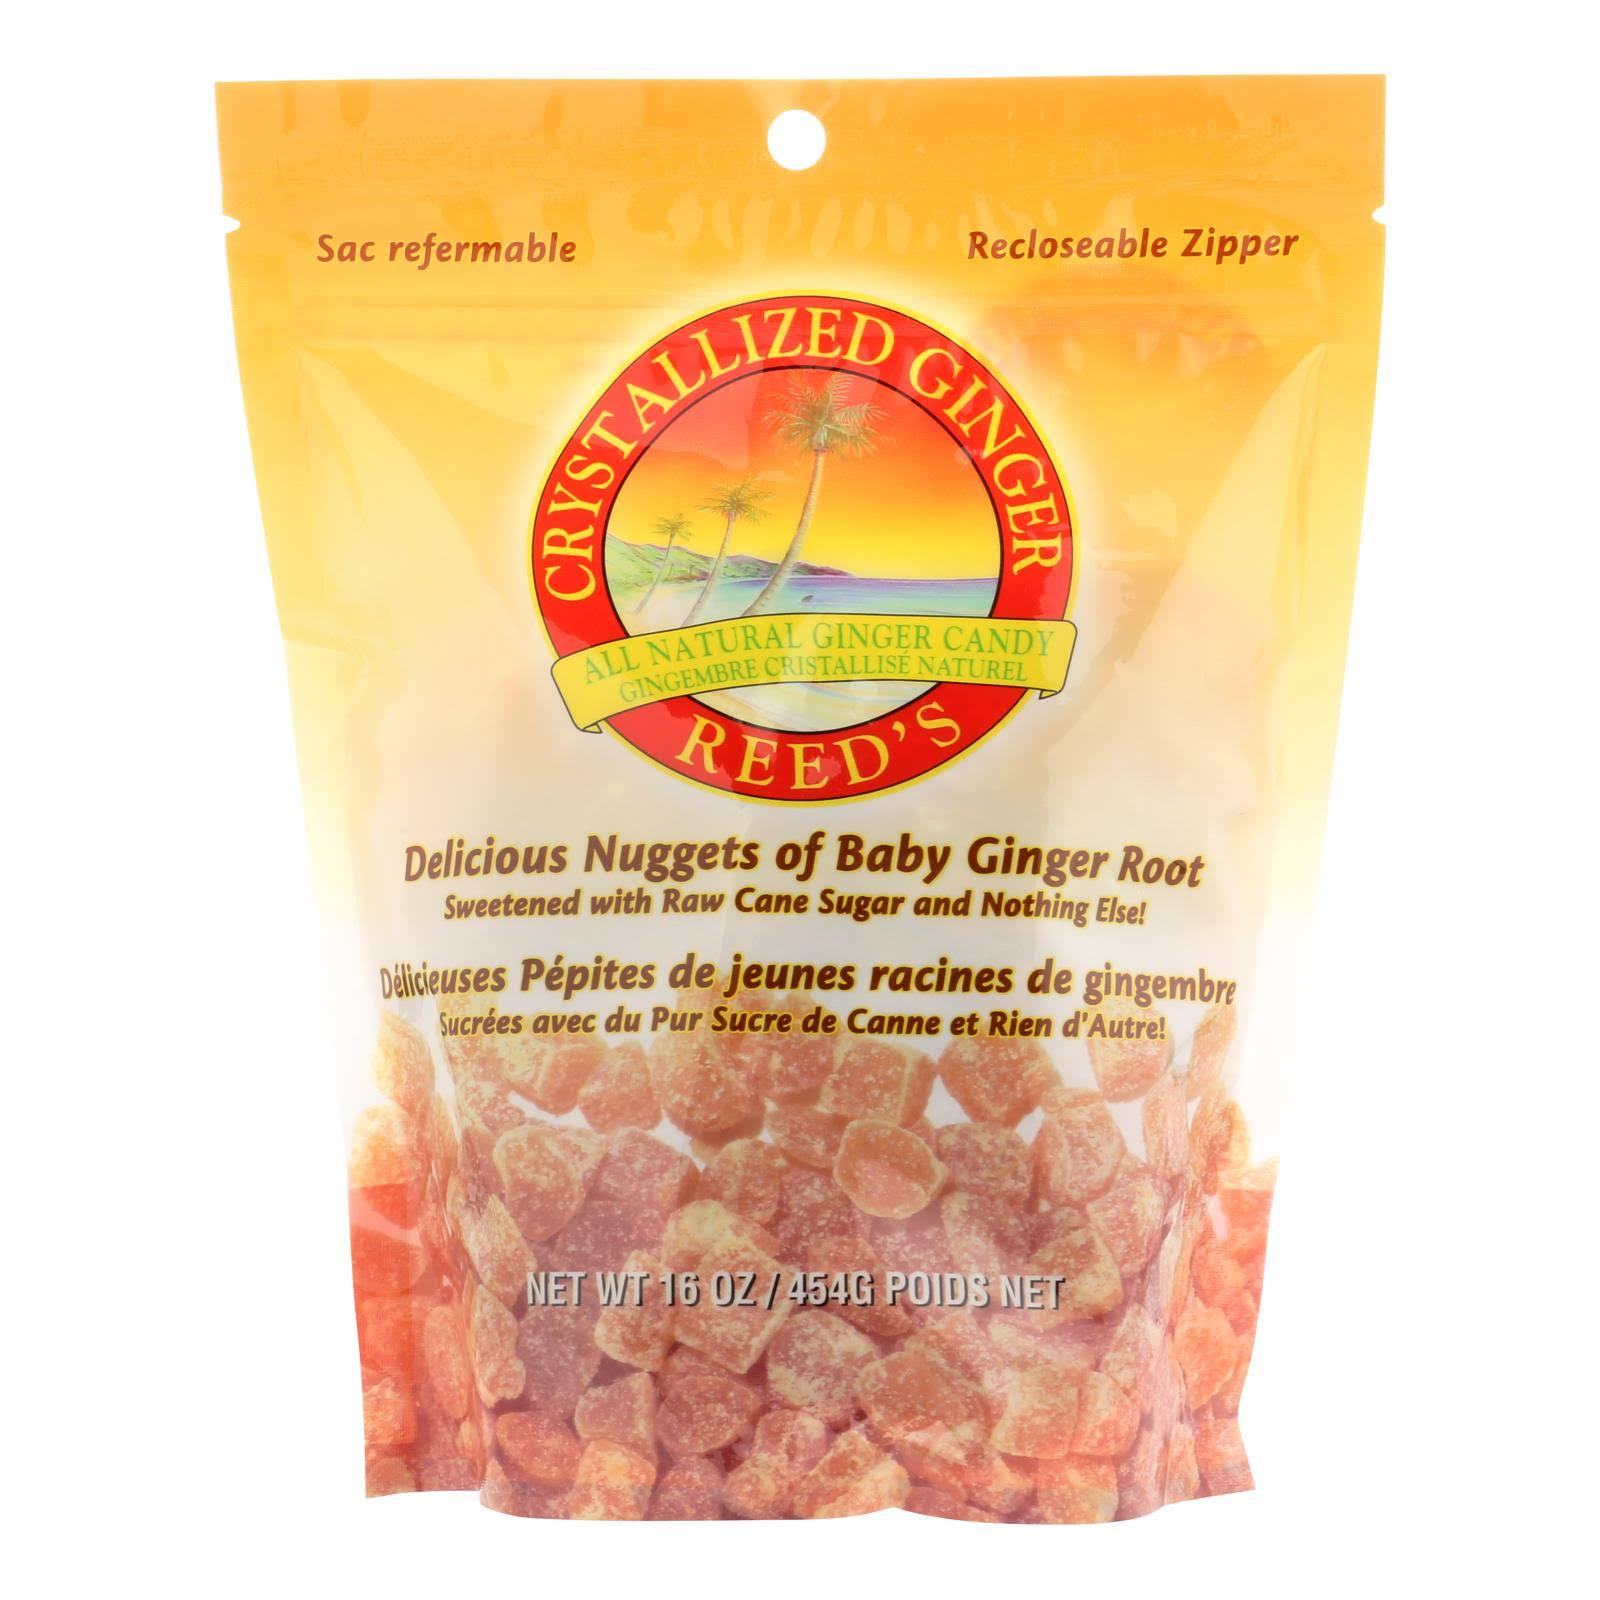 Reed's crystallized baby ginger root candy, sc596, Price/16 oz